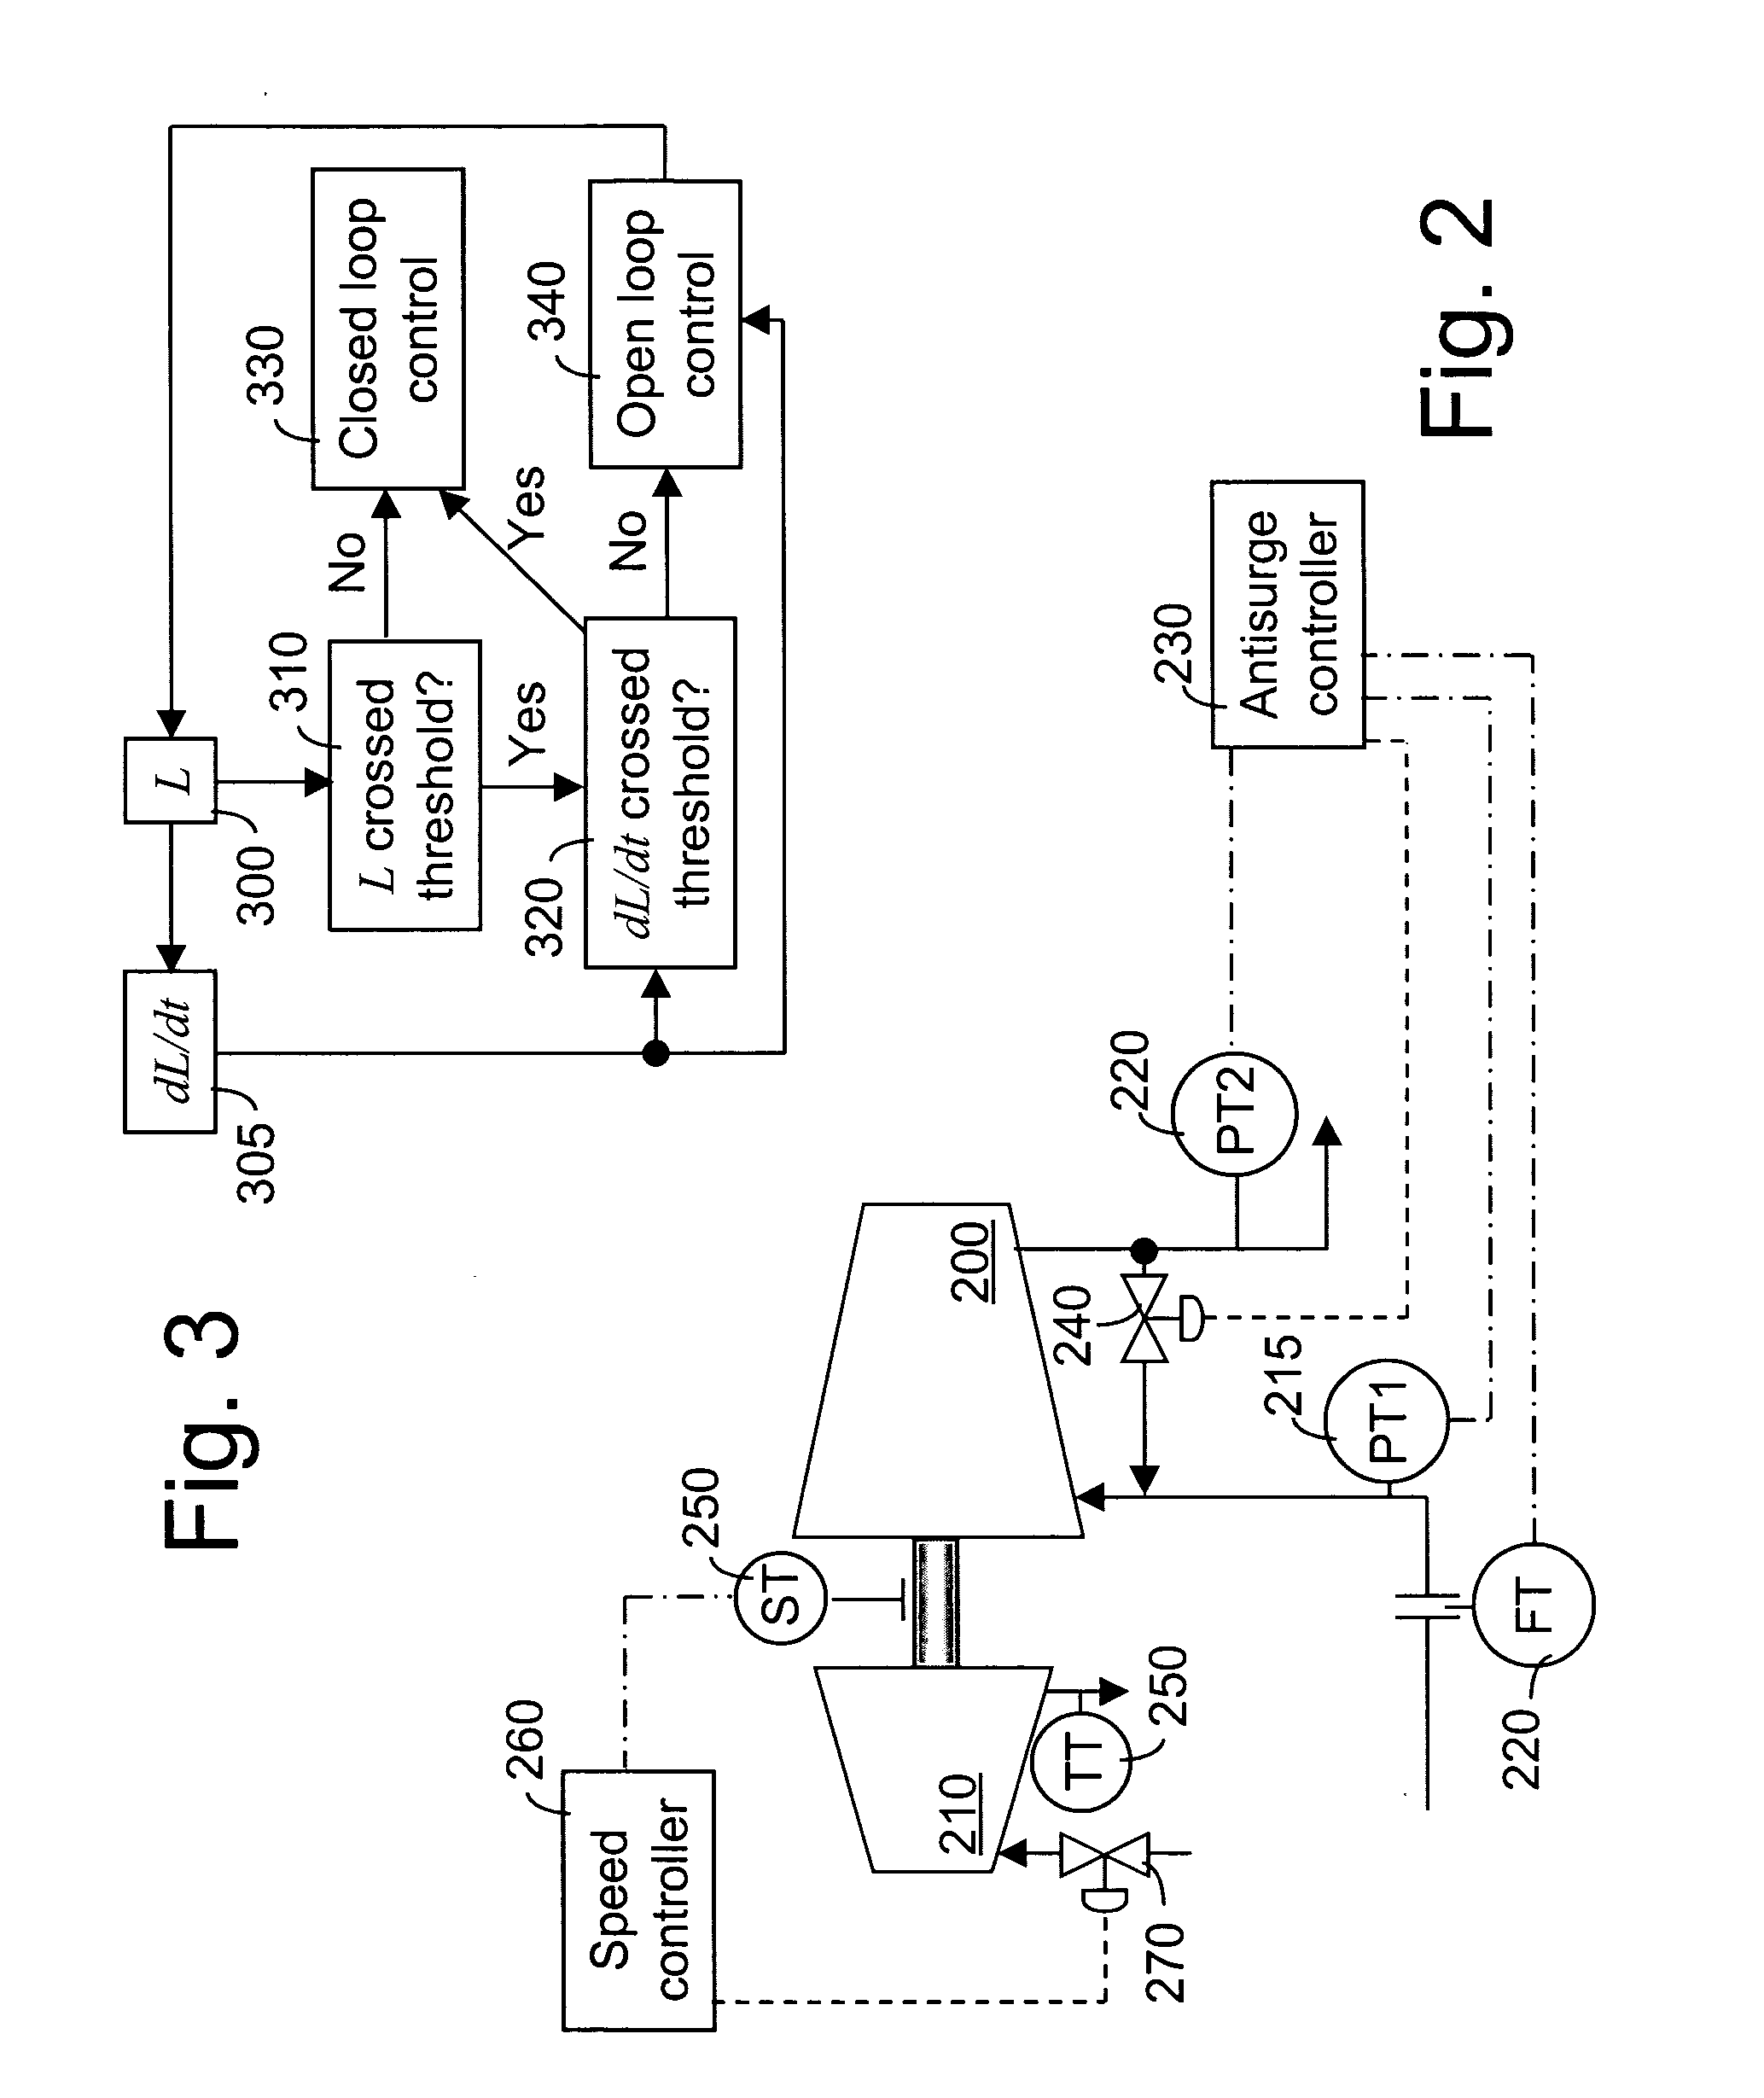 Method and apparatus for the prevention of critical process variable excursions in one or more turbomachines